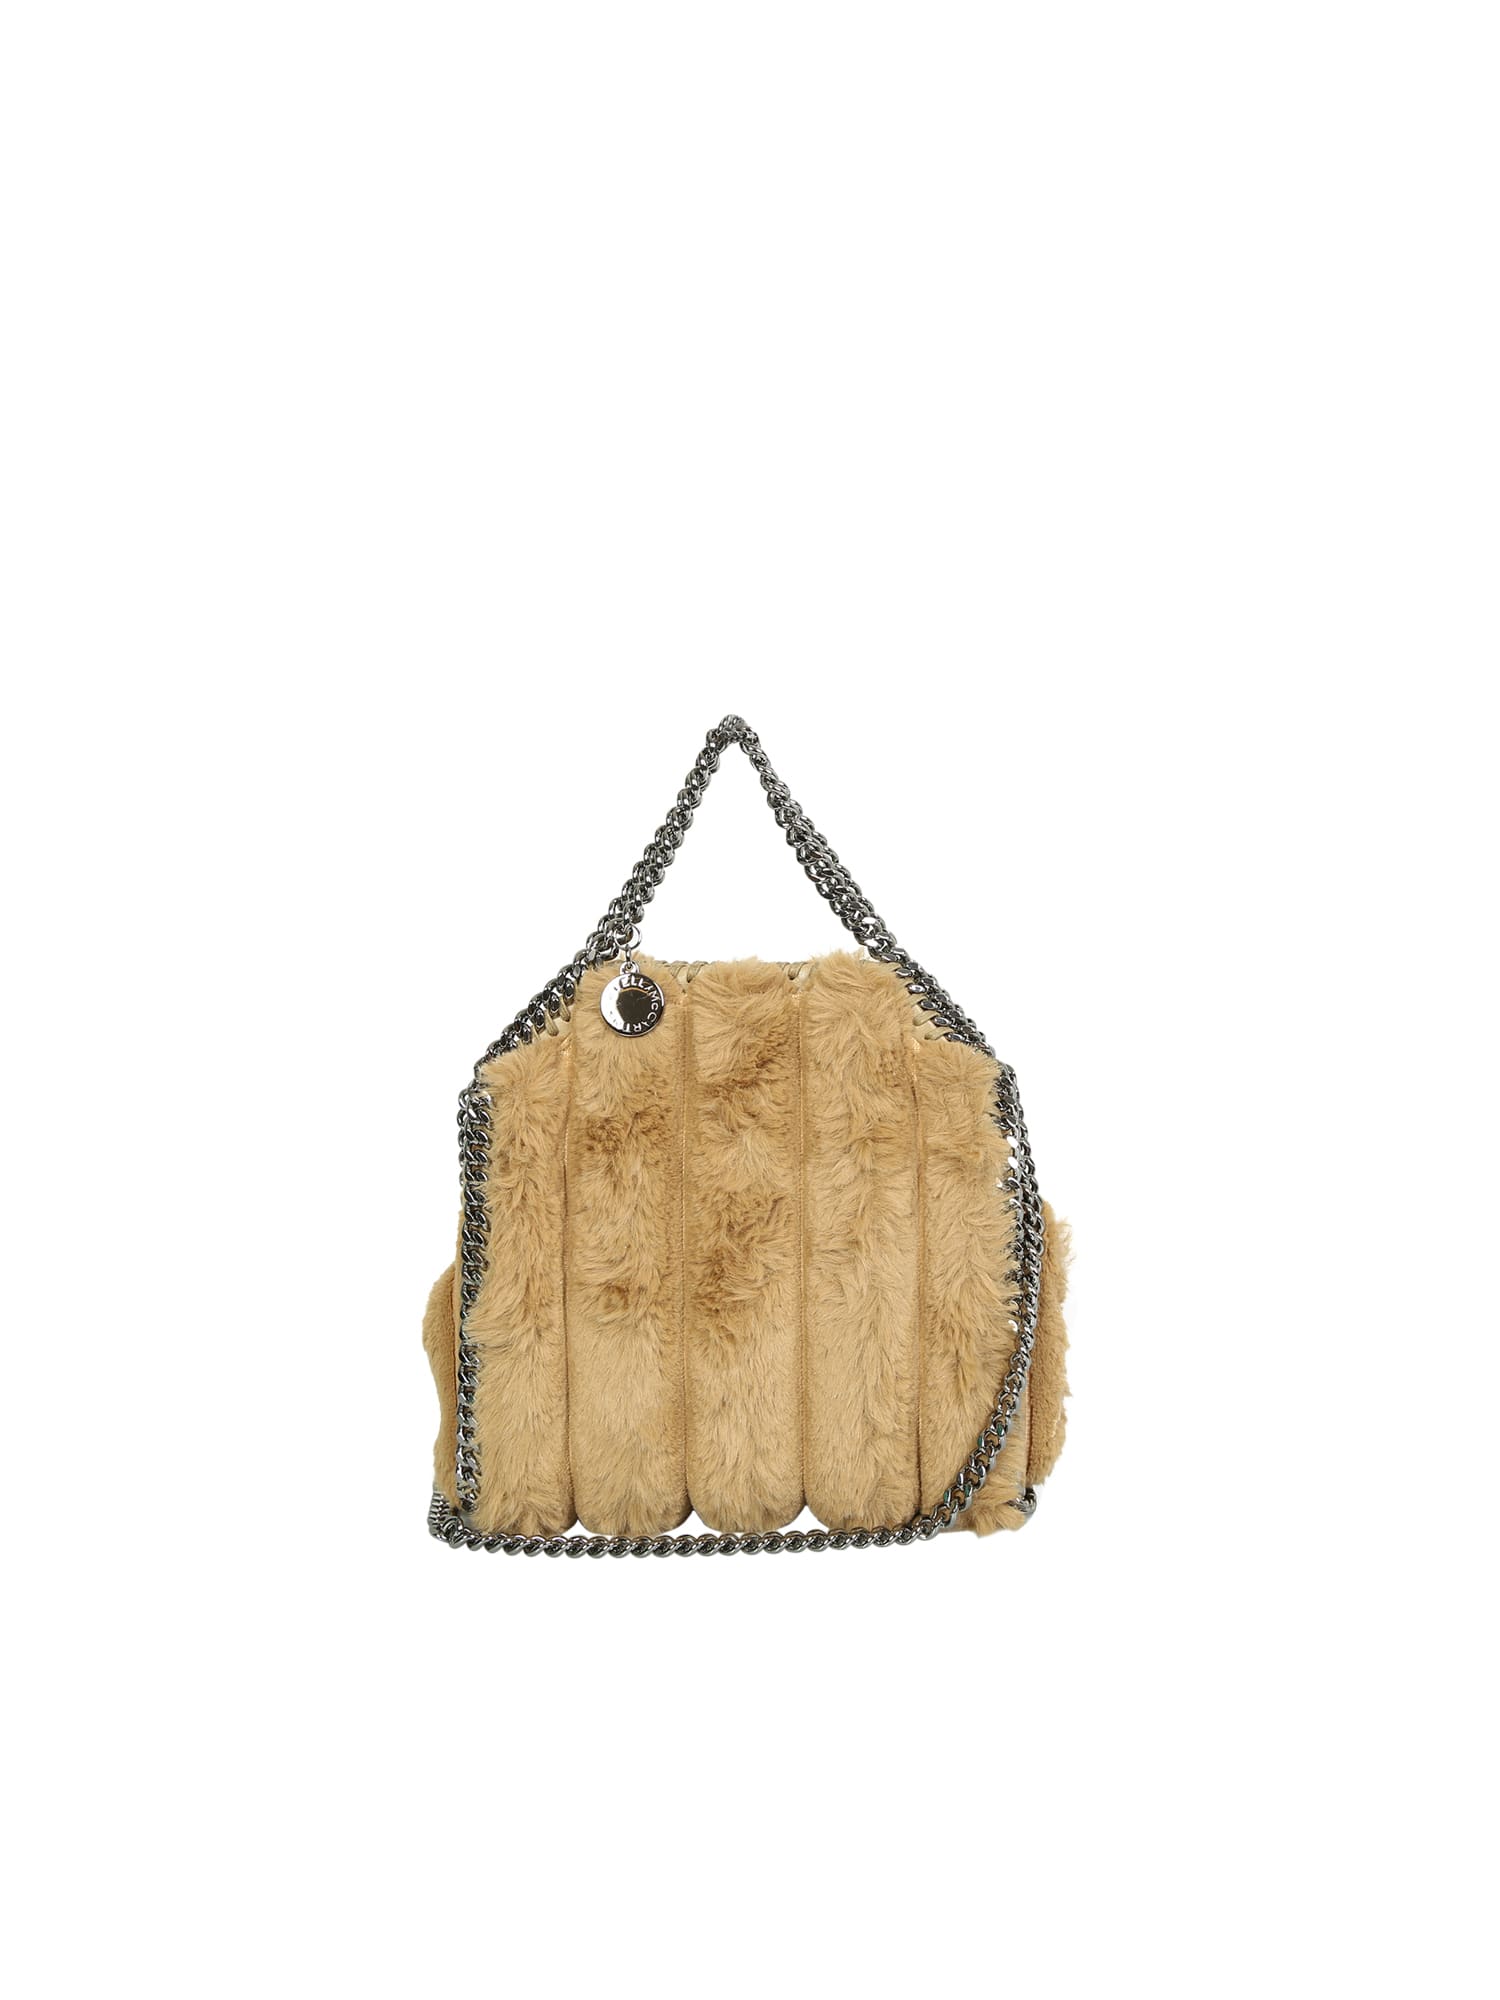 Stella Mccartney Tiny Falabella In Faux Fur Is The Mini Version Of The Maisons Iconic Bag